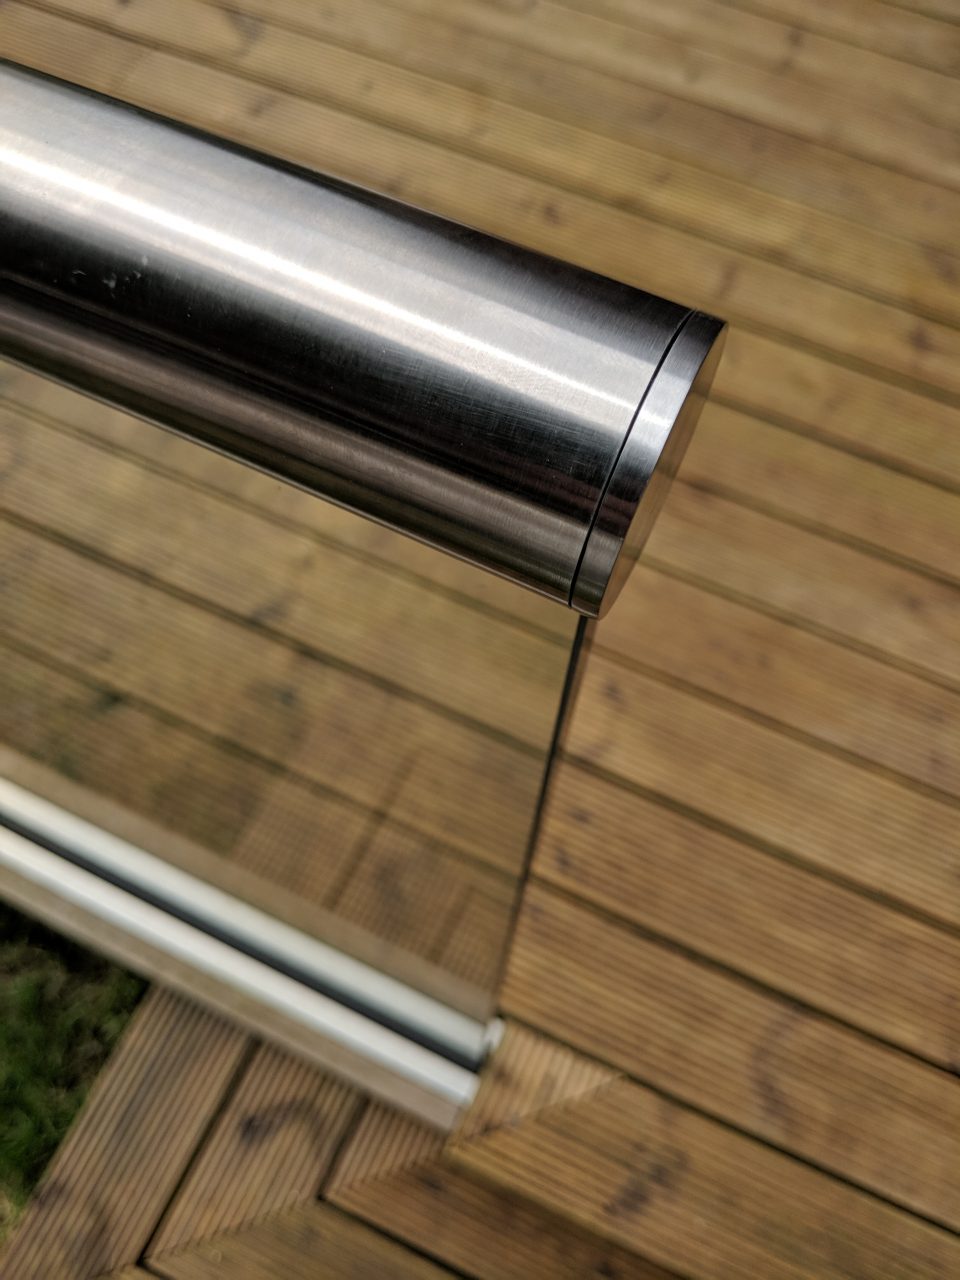 Slotted end cap on slotted handrail installed ontop a glass balustrade on decking